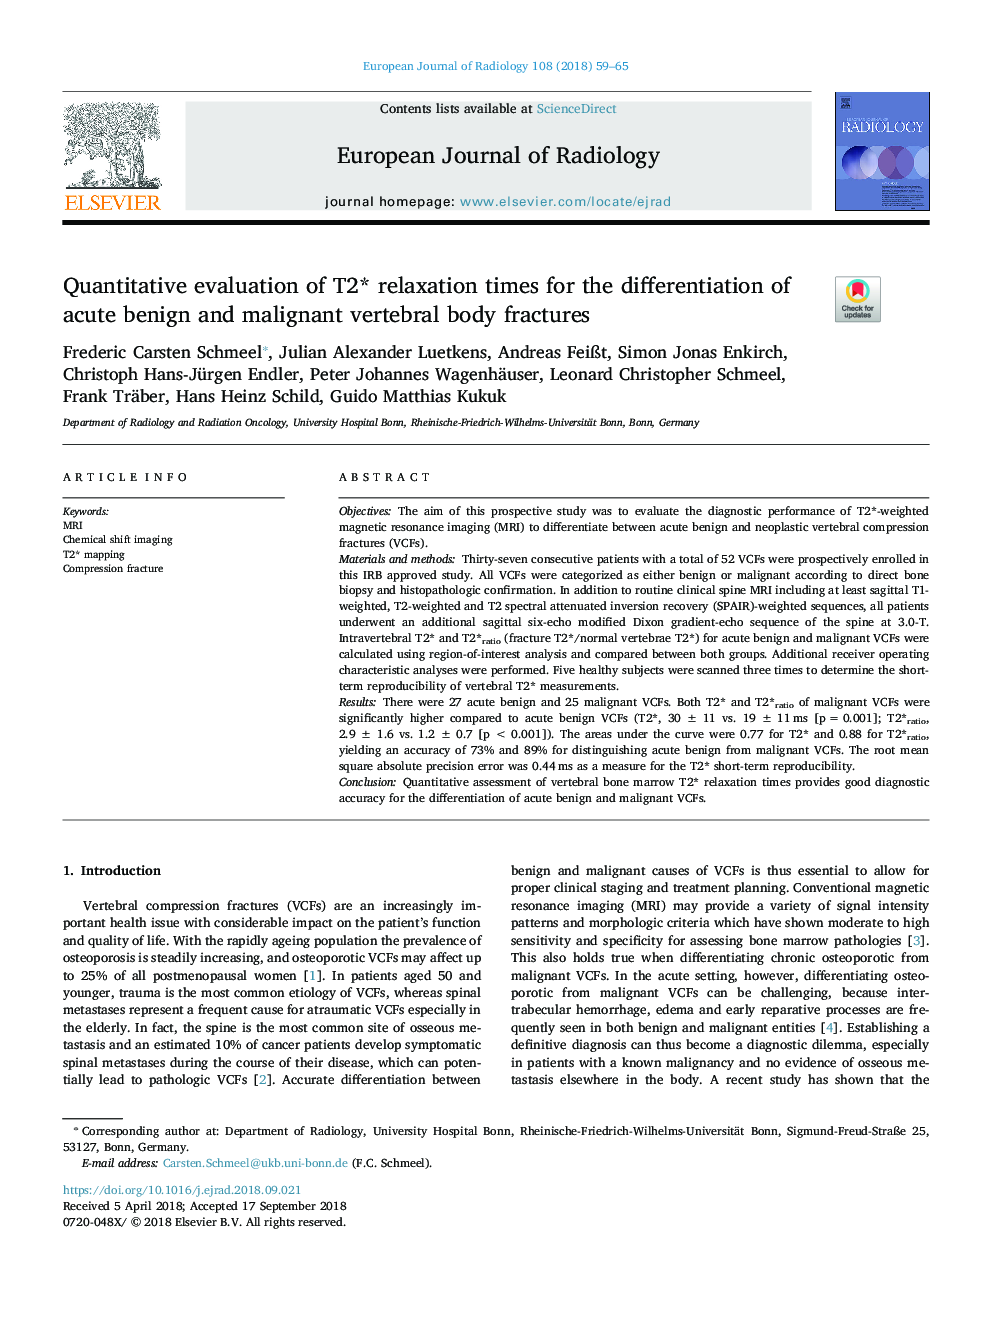 Quantitative evaluation of T2* relaxation times for the differentiation of acute benign and malignant vertebral body fractures